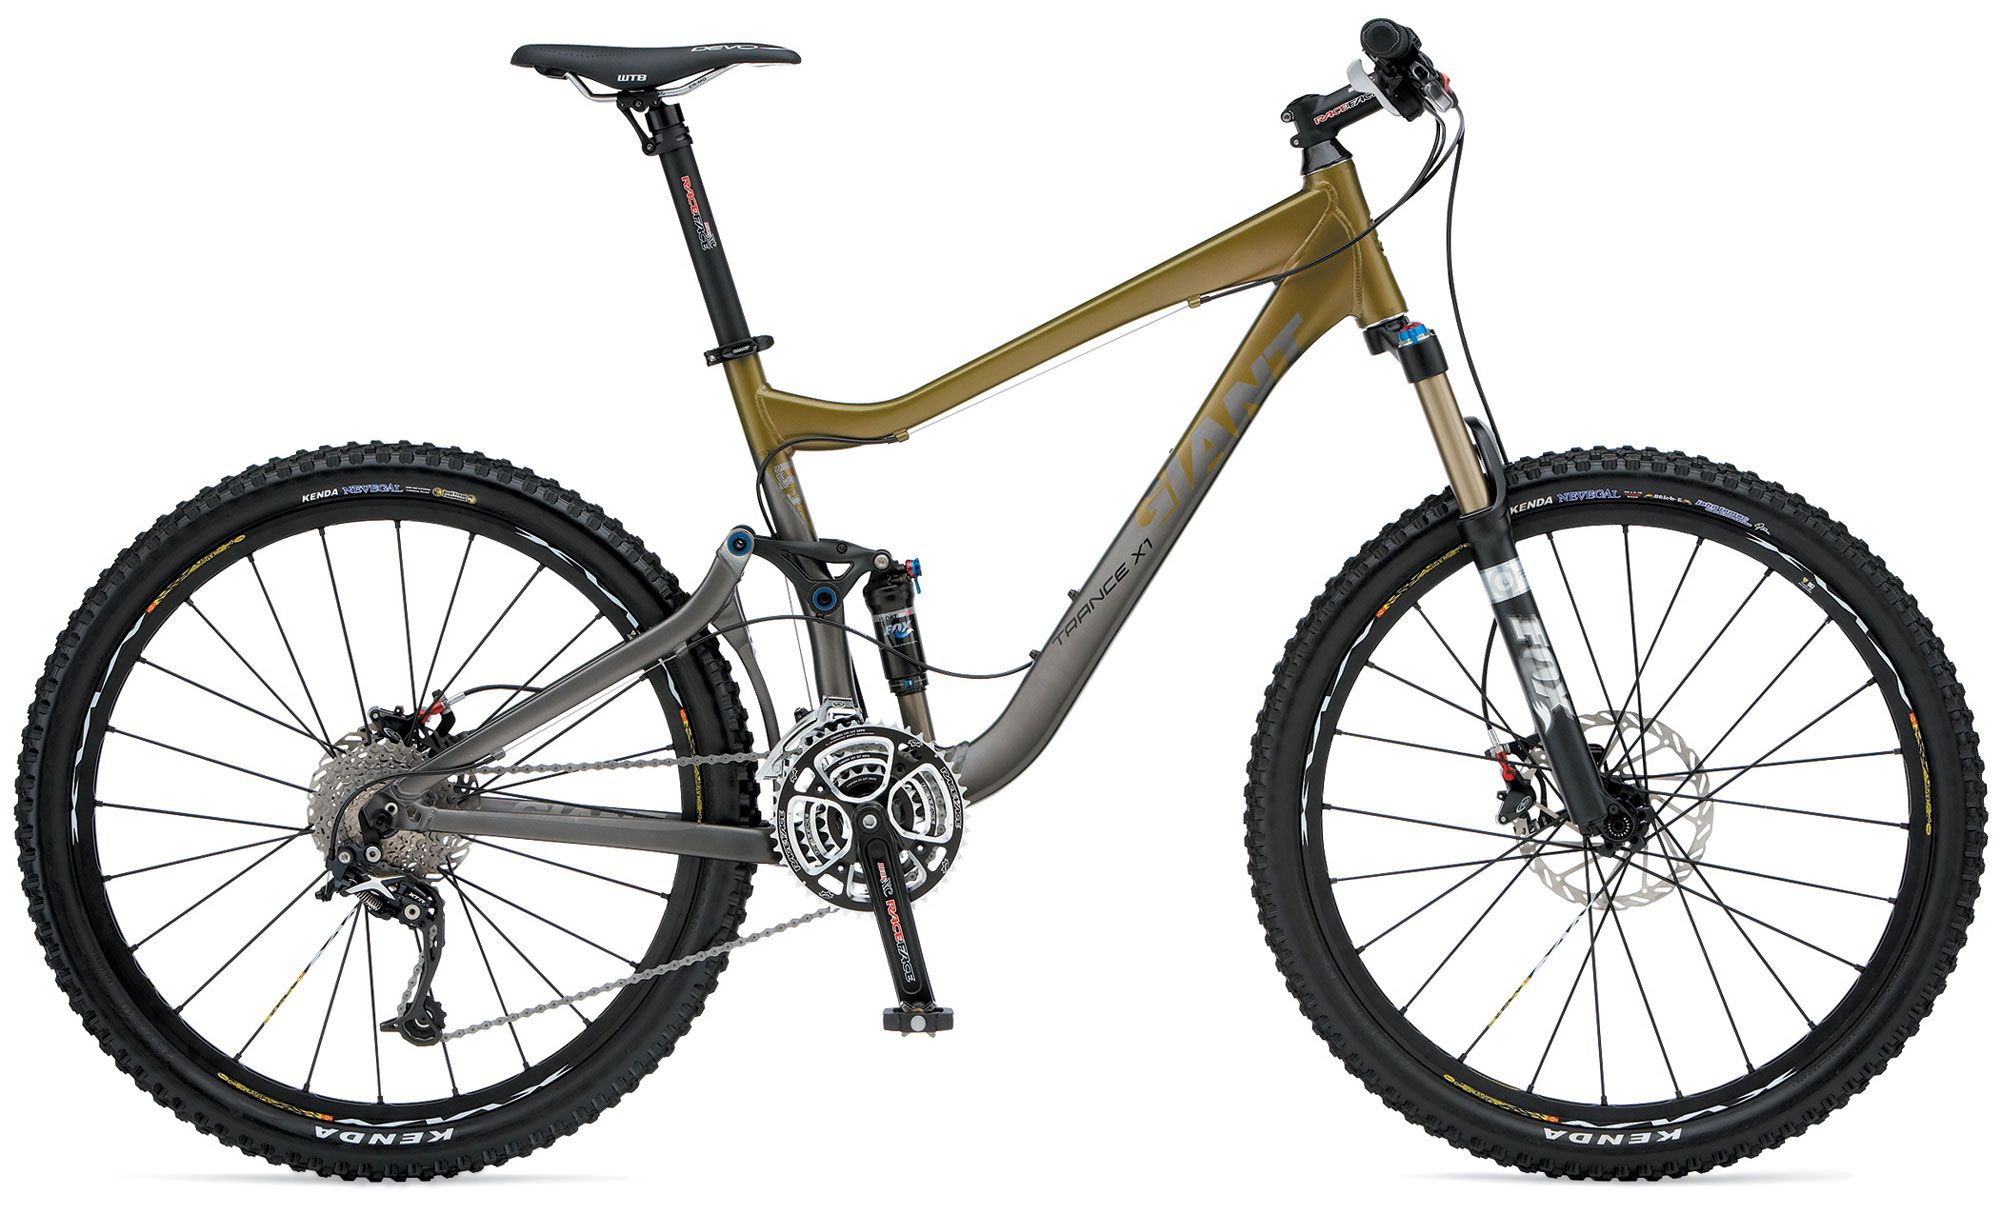 2009 Giant Trance X1 - Bicycle Details 